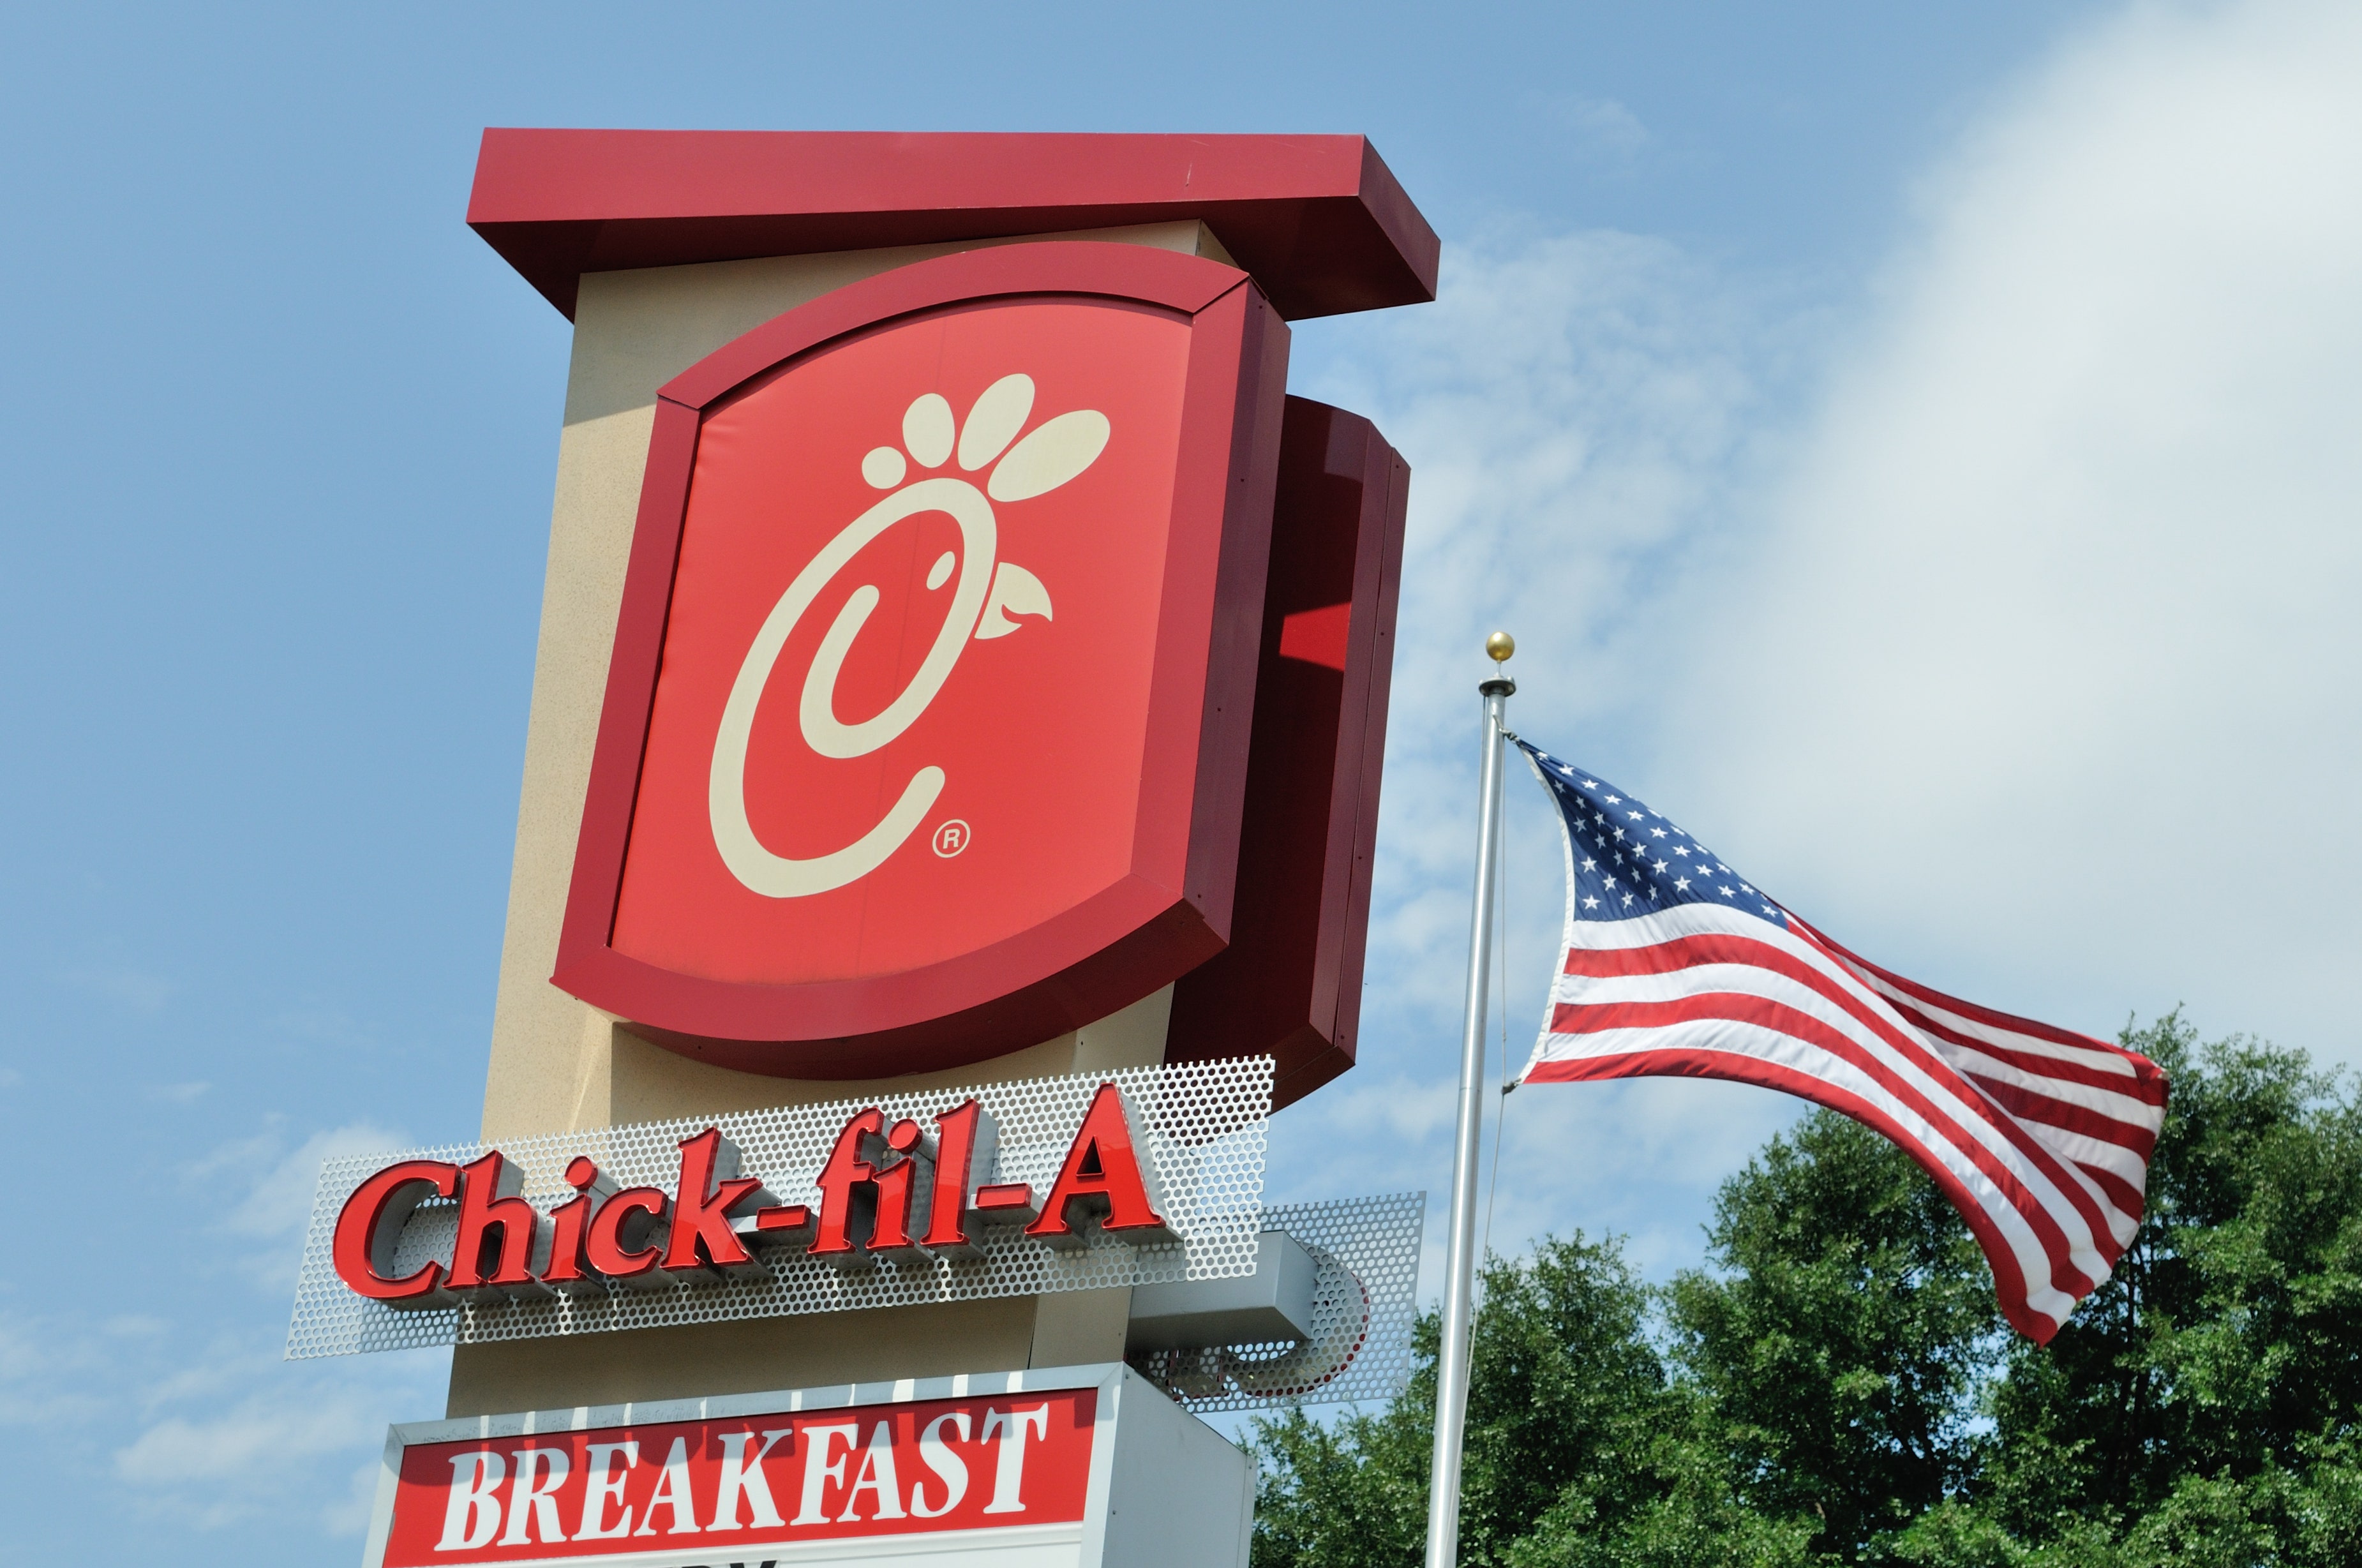 Memphis Chick-fil-A owner advises city on COVID-19 vaccine lines